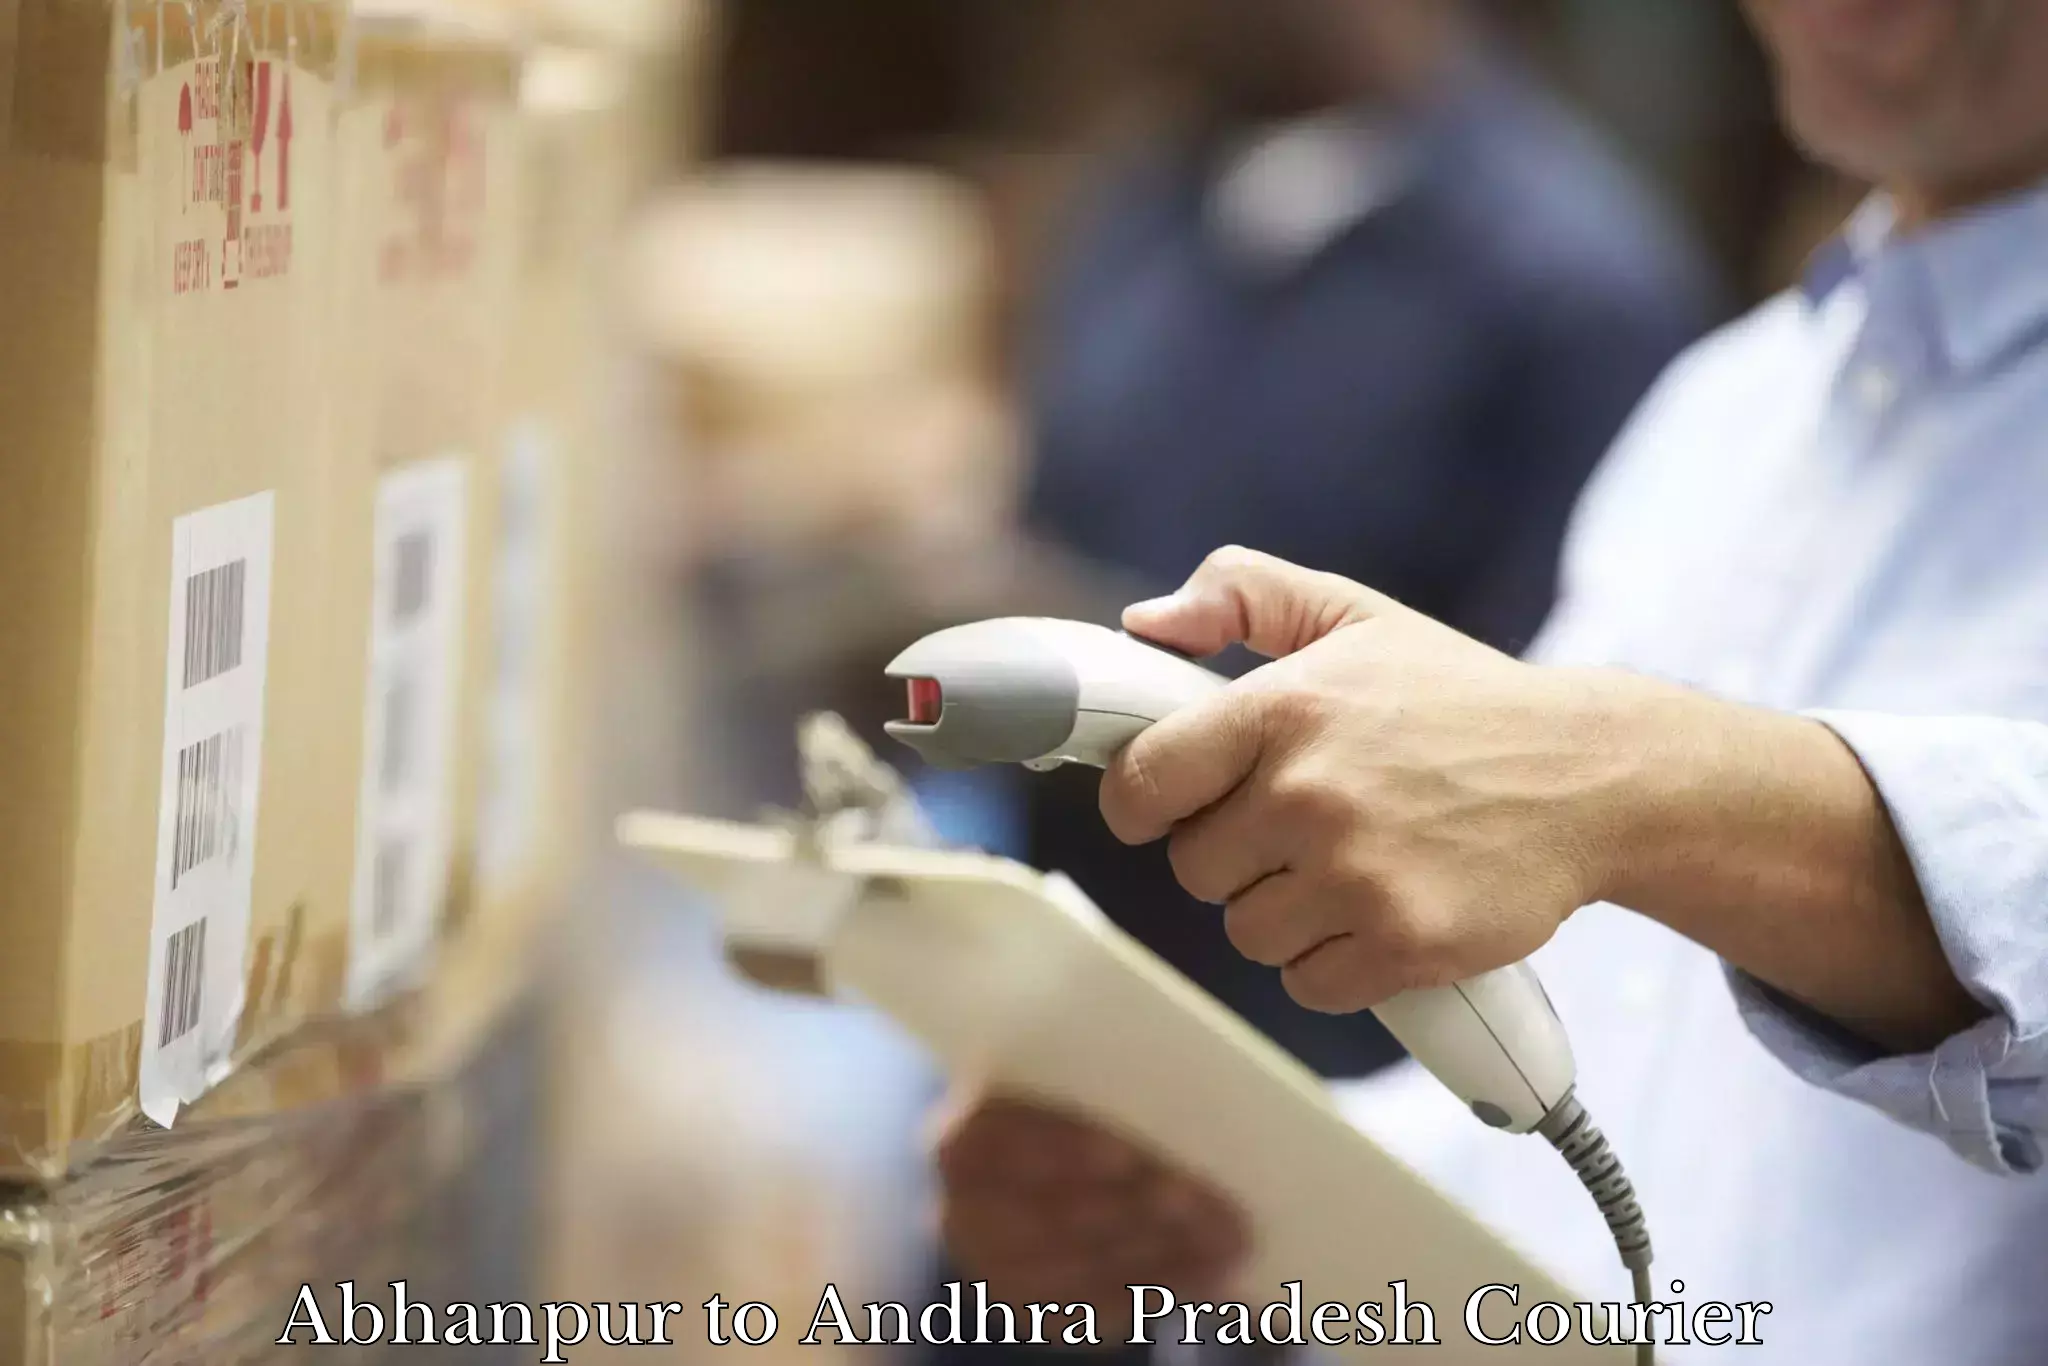 Global courier networks Abhanpur to Andhra Pradesh